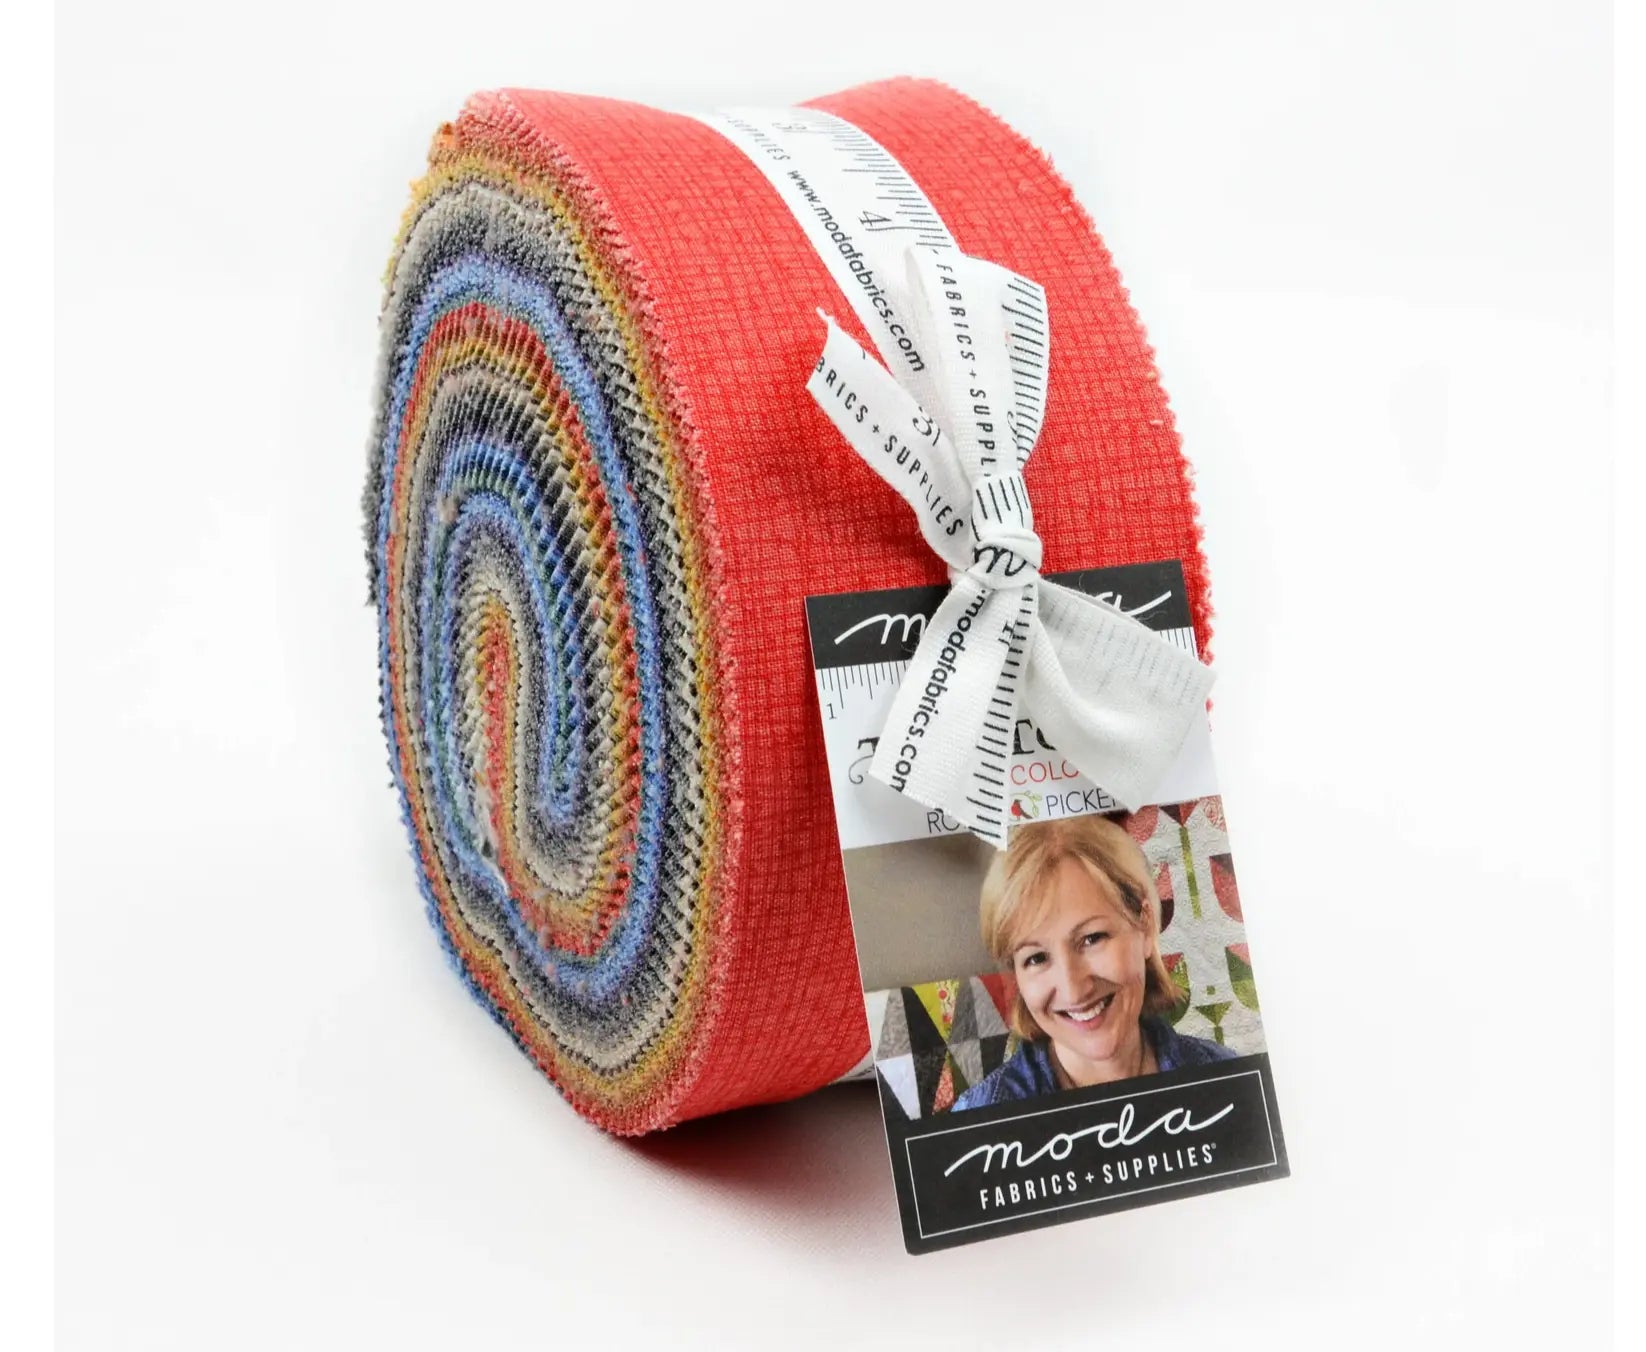 Thatched New Jelly Roll - Linda's Electric Quilters